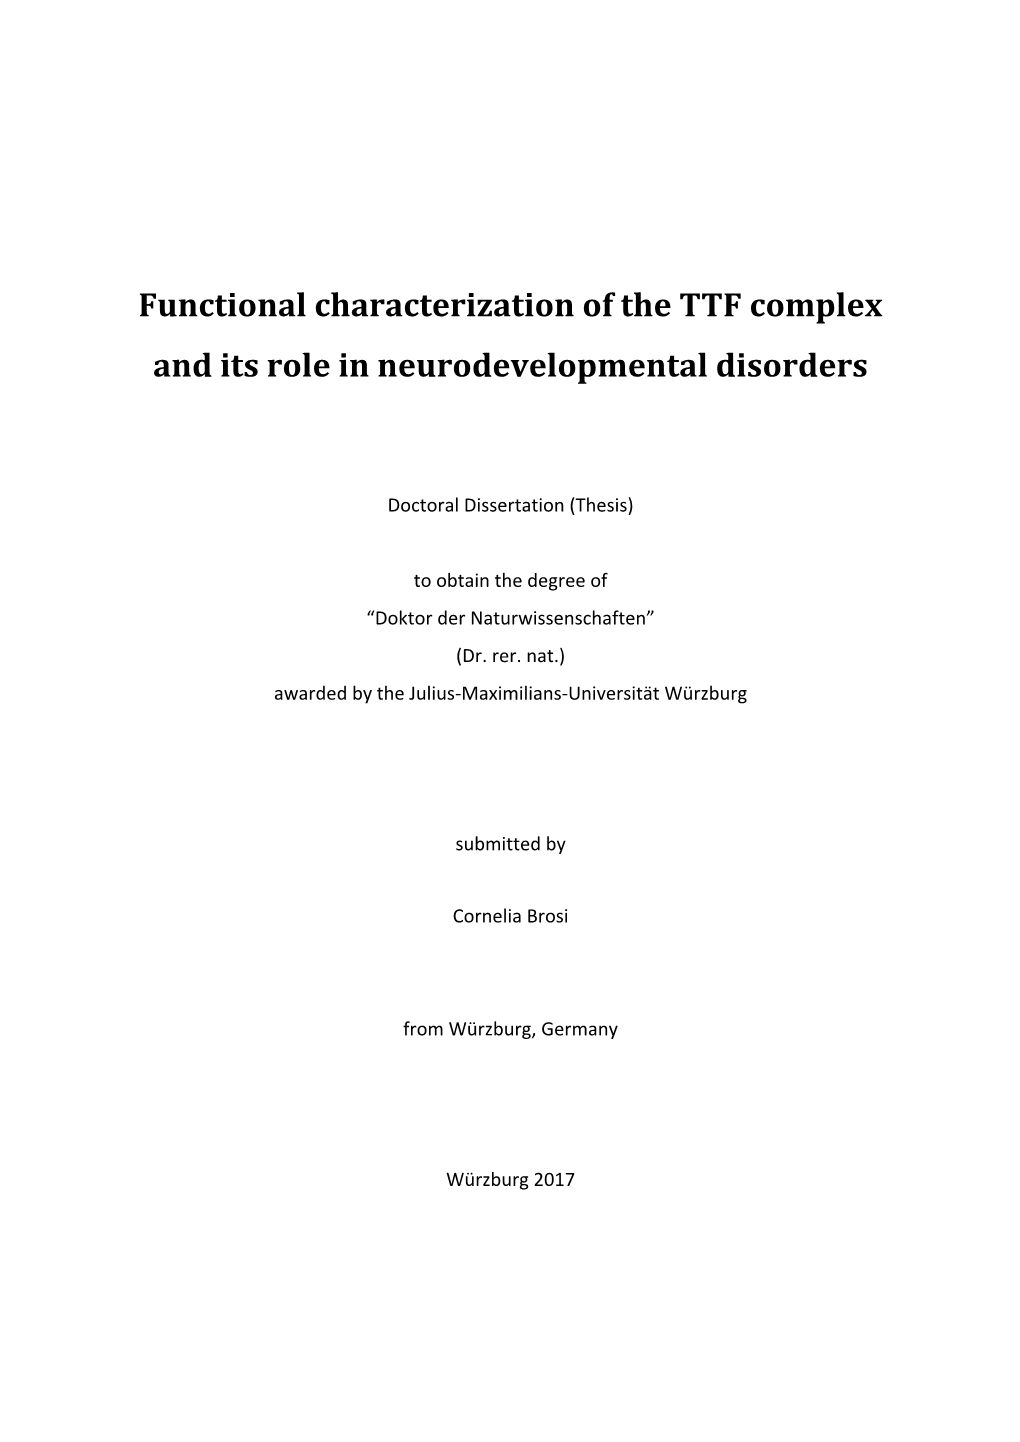 Functional Characterization of the TTF Complex and Its Role in Neurodevelopmental Disorders